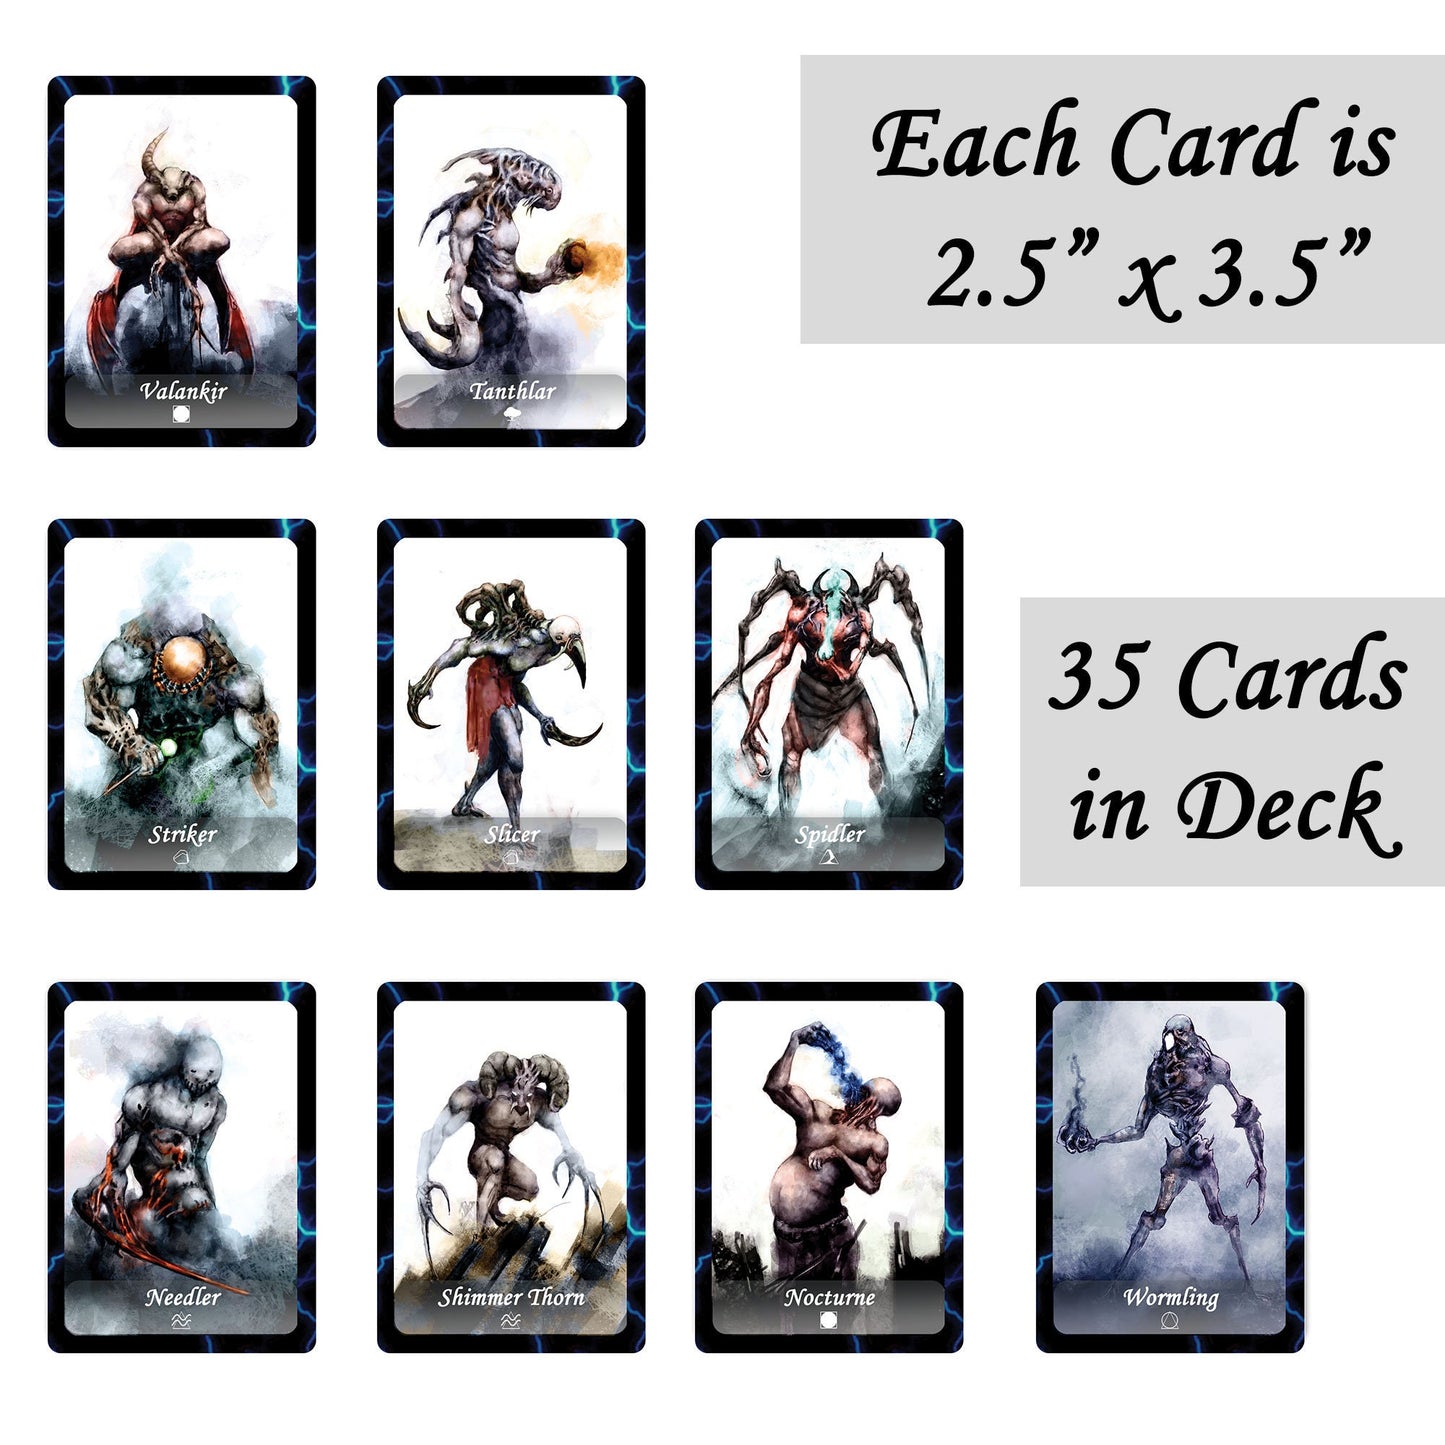 Necromar Deck of 35 Monster Cards with Downloadable PDF used in DnD and Writing